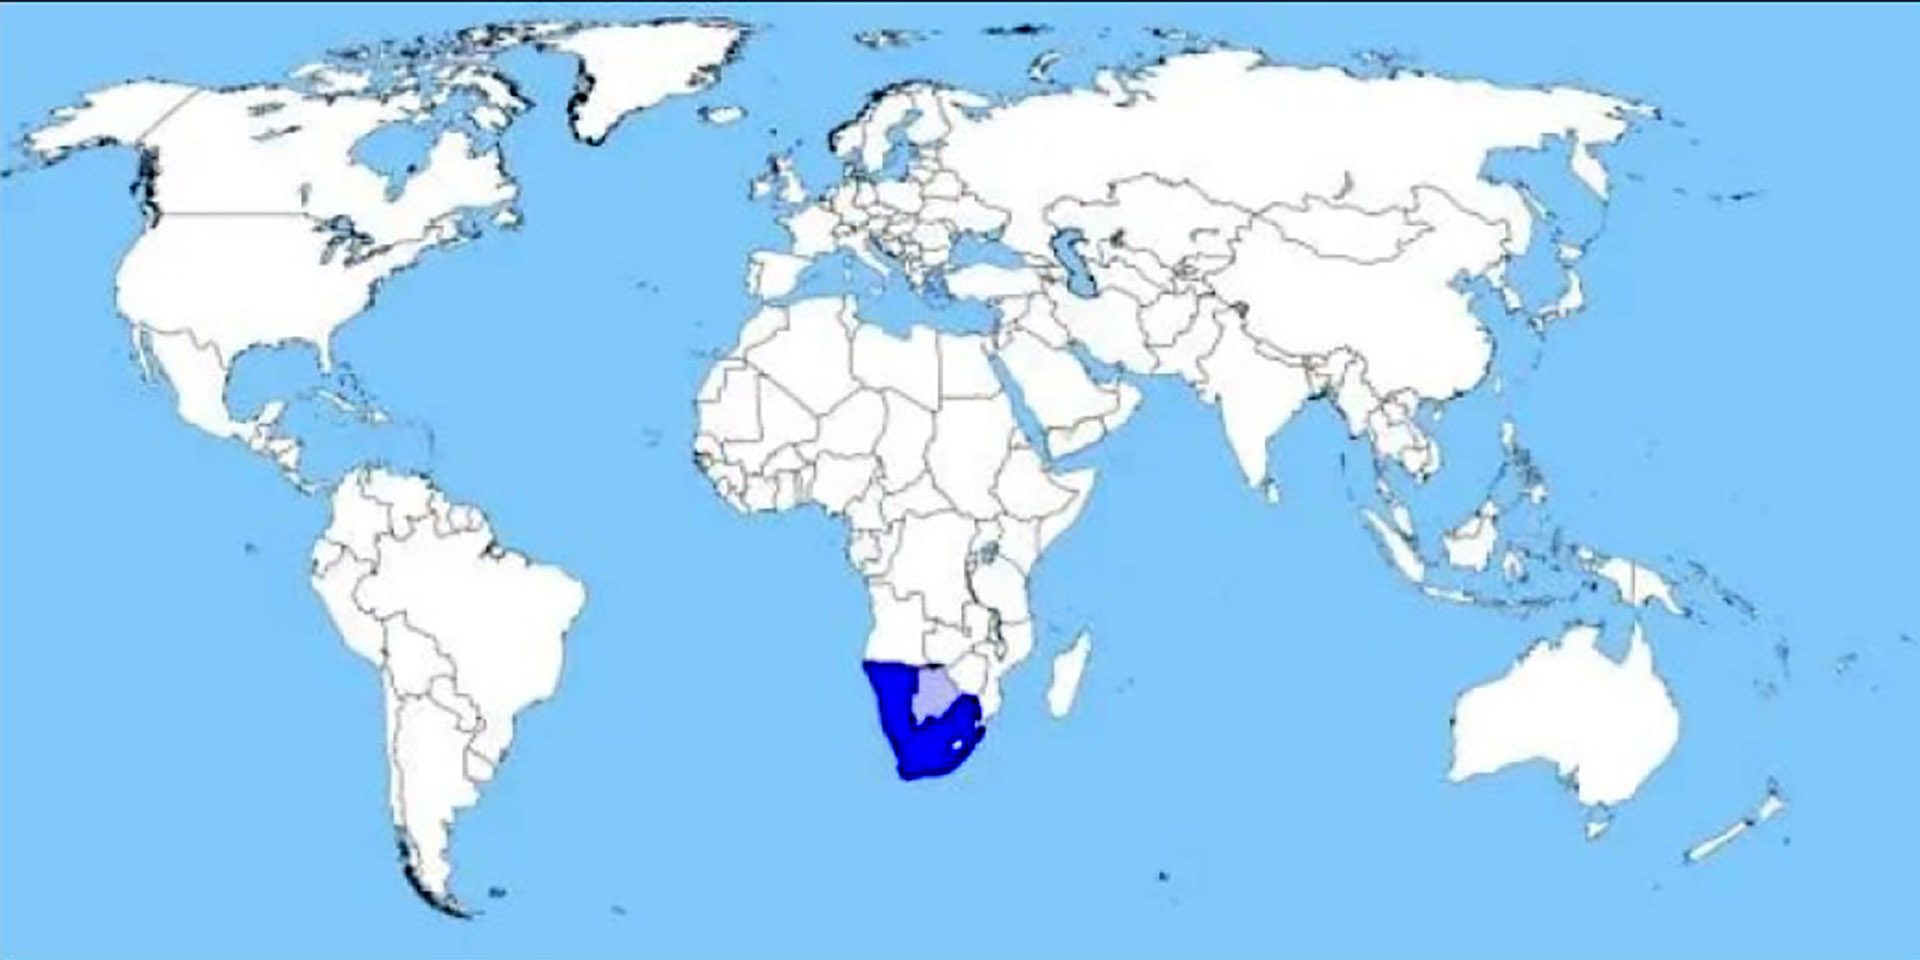 World map, southern African countries highlighted